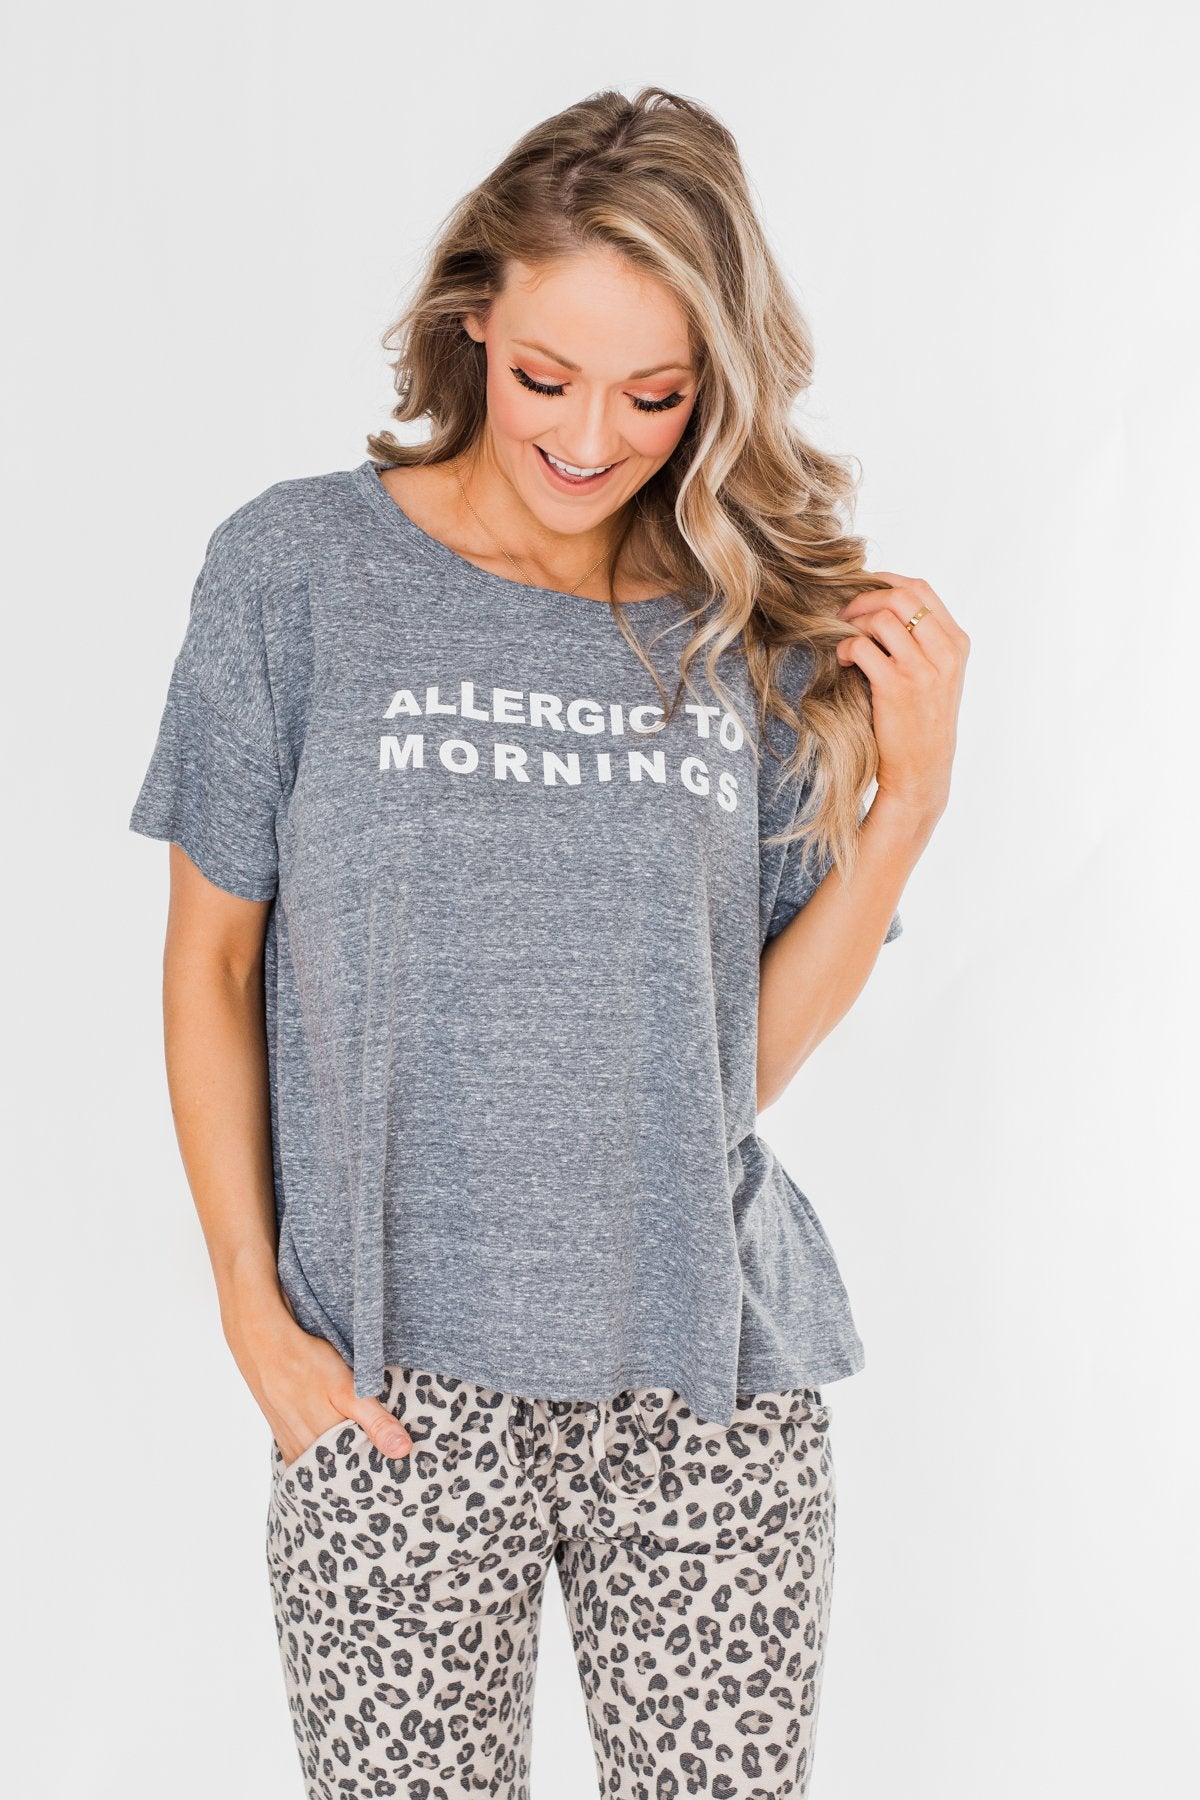 "Allergic To Mornings" Graphic Tee-Gray